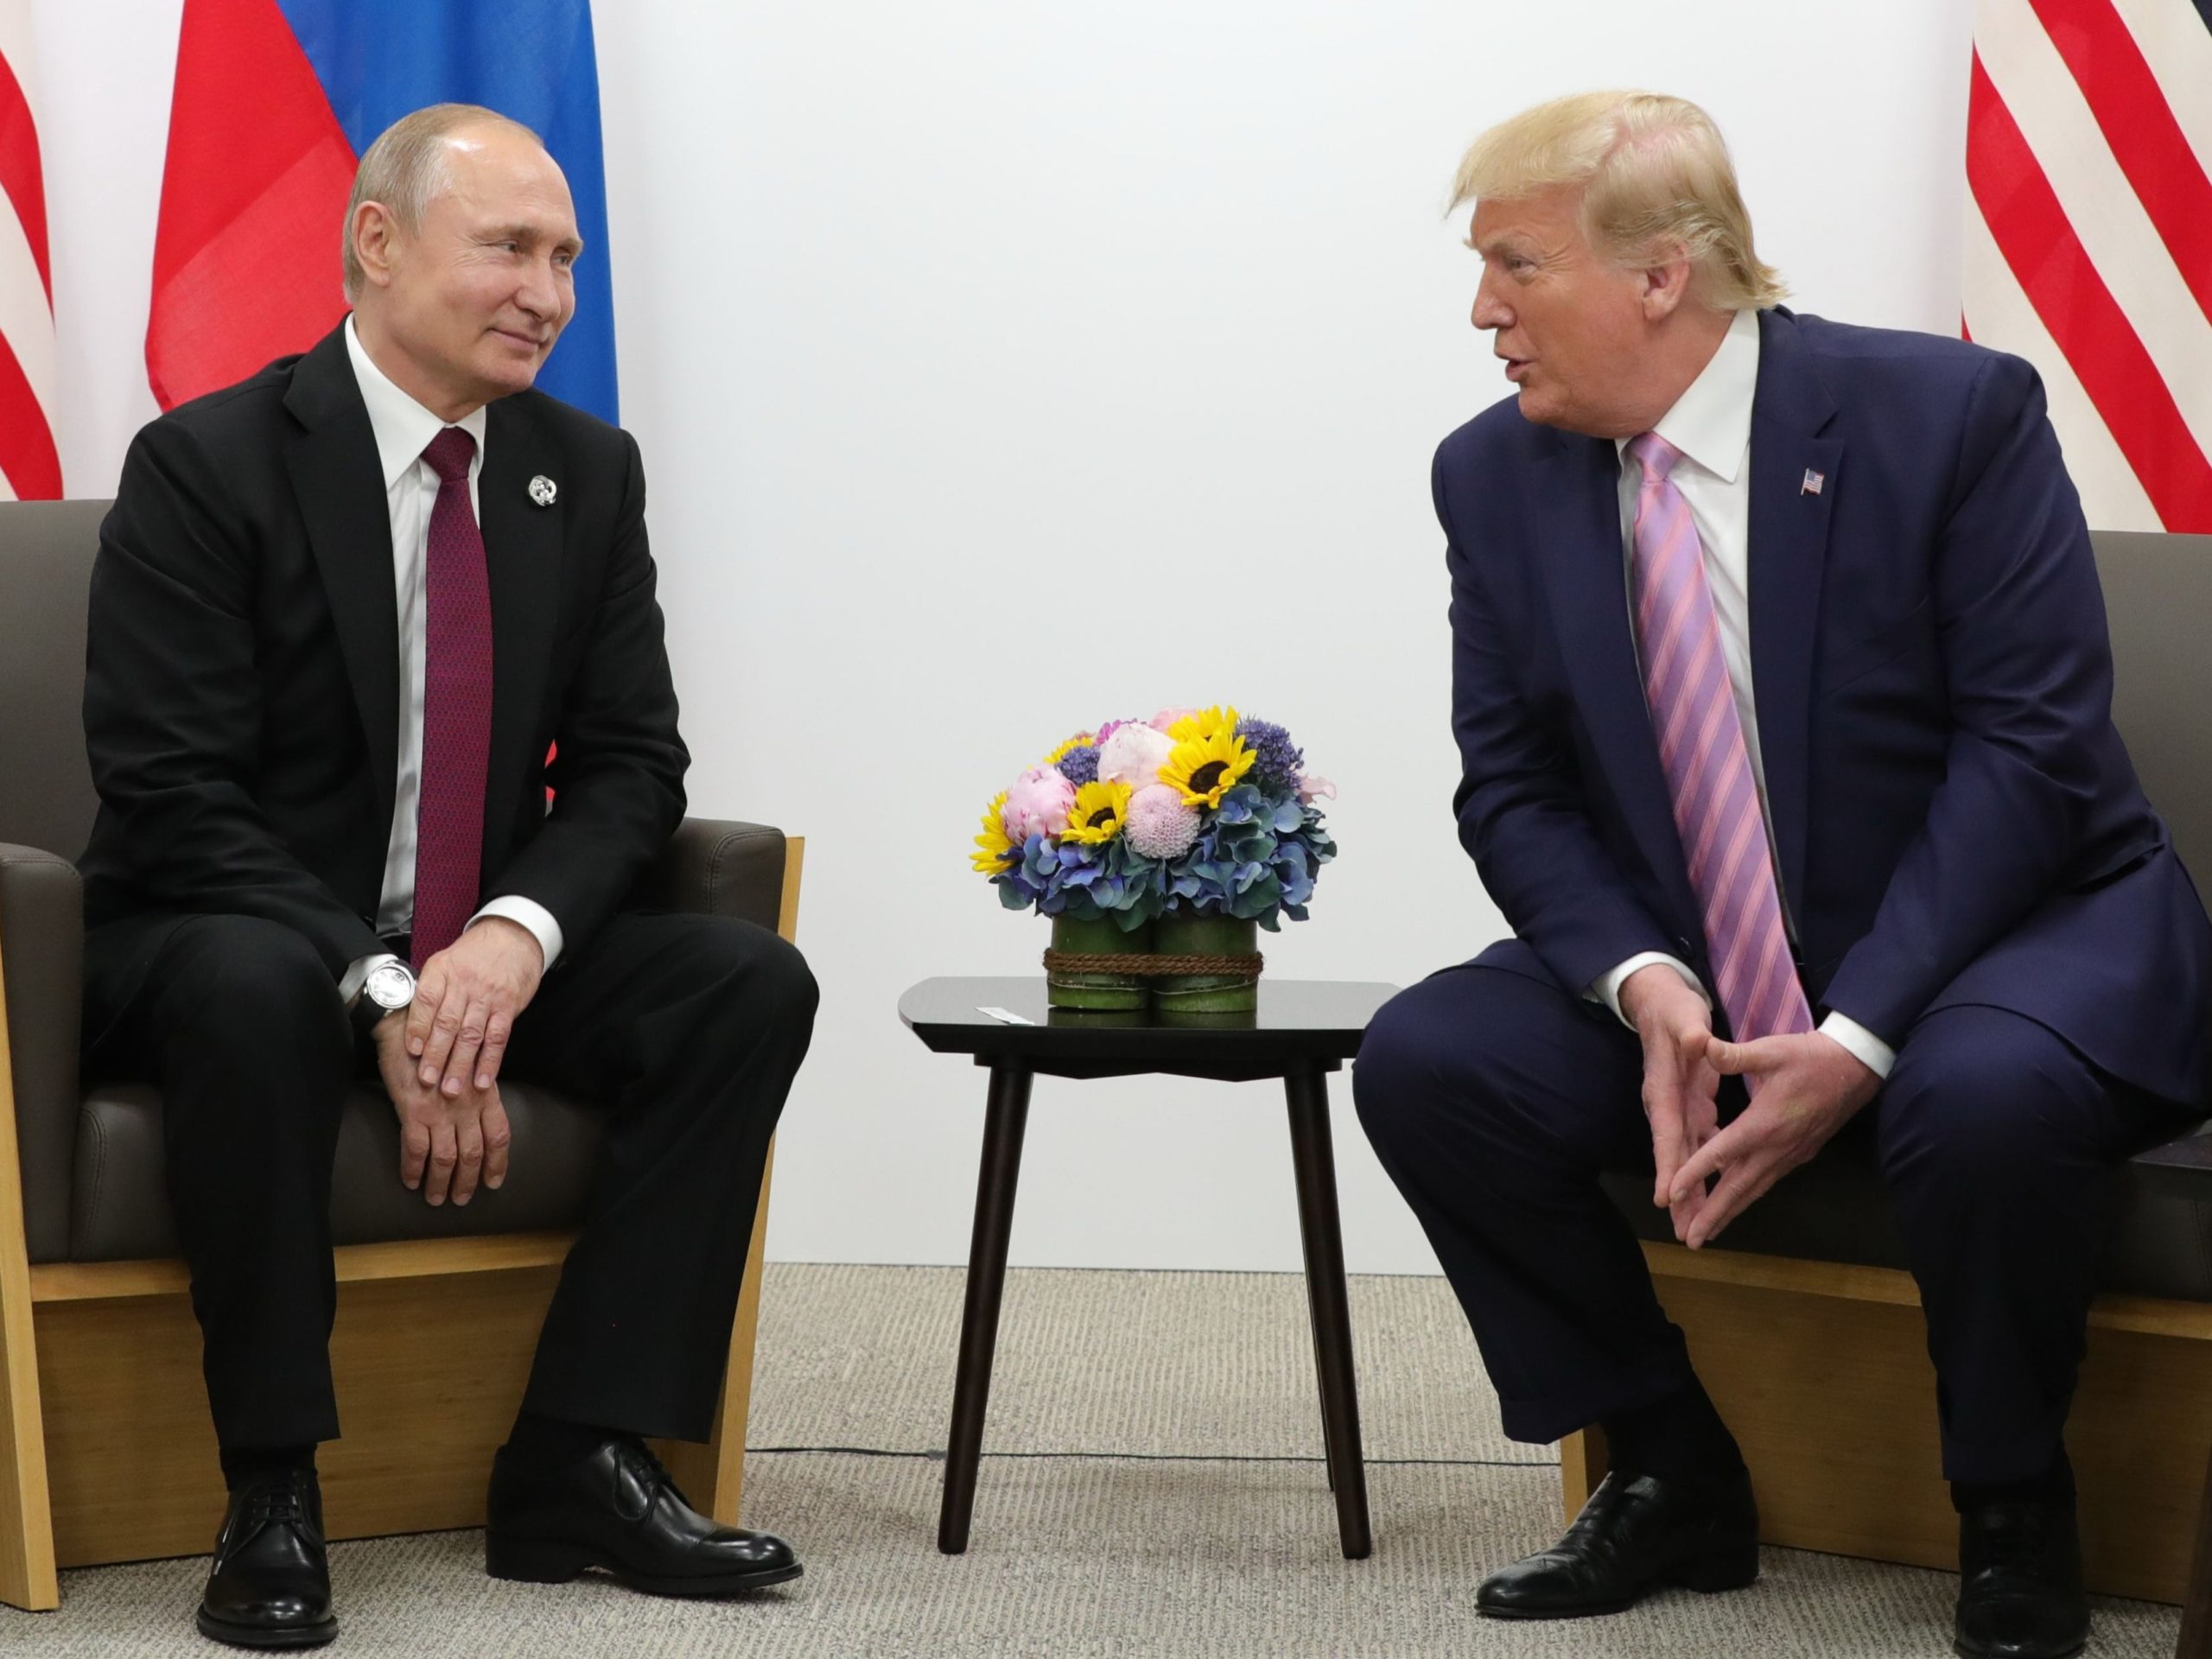 Putin allegedly tried to trigger Trump’s germaphobia by coughing in a meeting